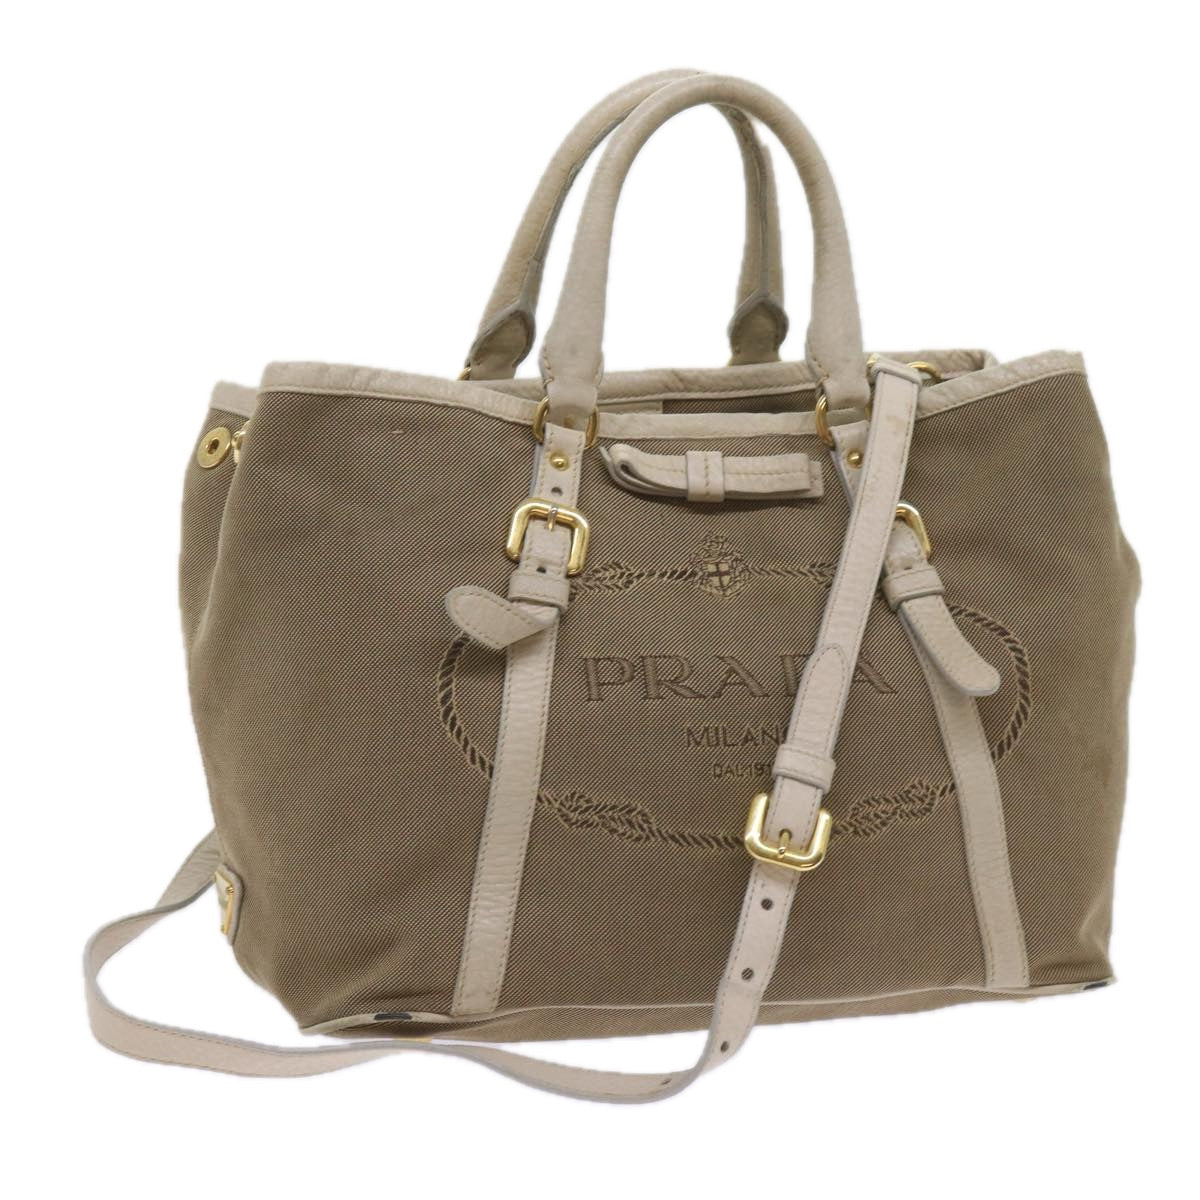 PRADA Hand Bag Canvas Leather 2way Brown Auth bs10386